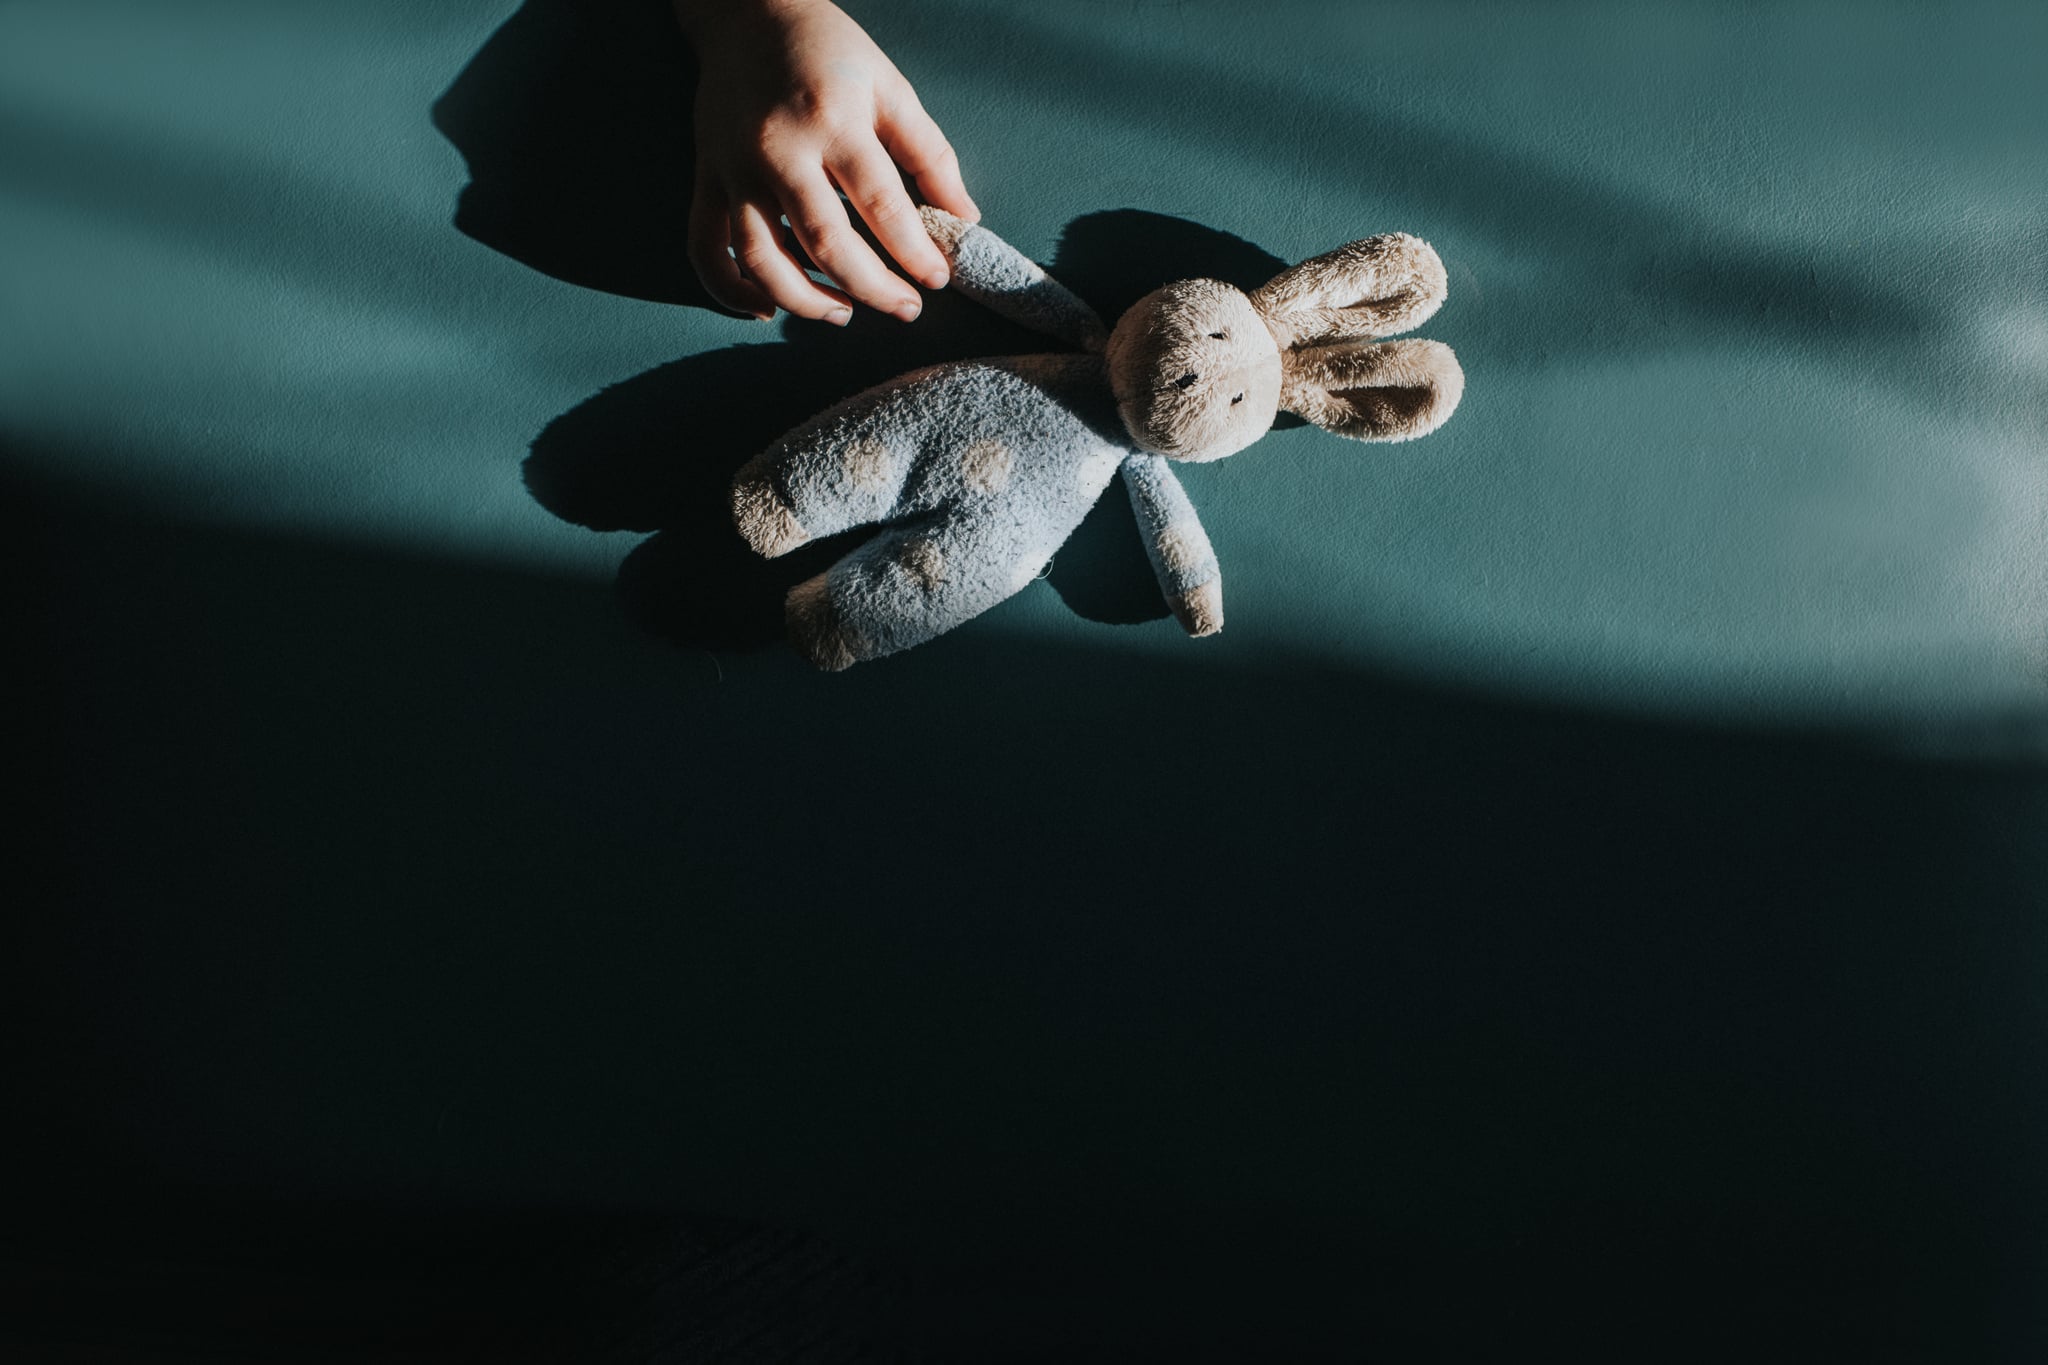 Conceptual image of a small child's hand reaching to grab a small soft blue toy bunny by the paw. The toy is illuminated by sunlight and shadows provide space for copy.